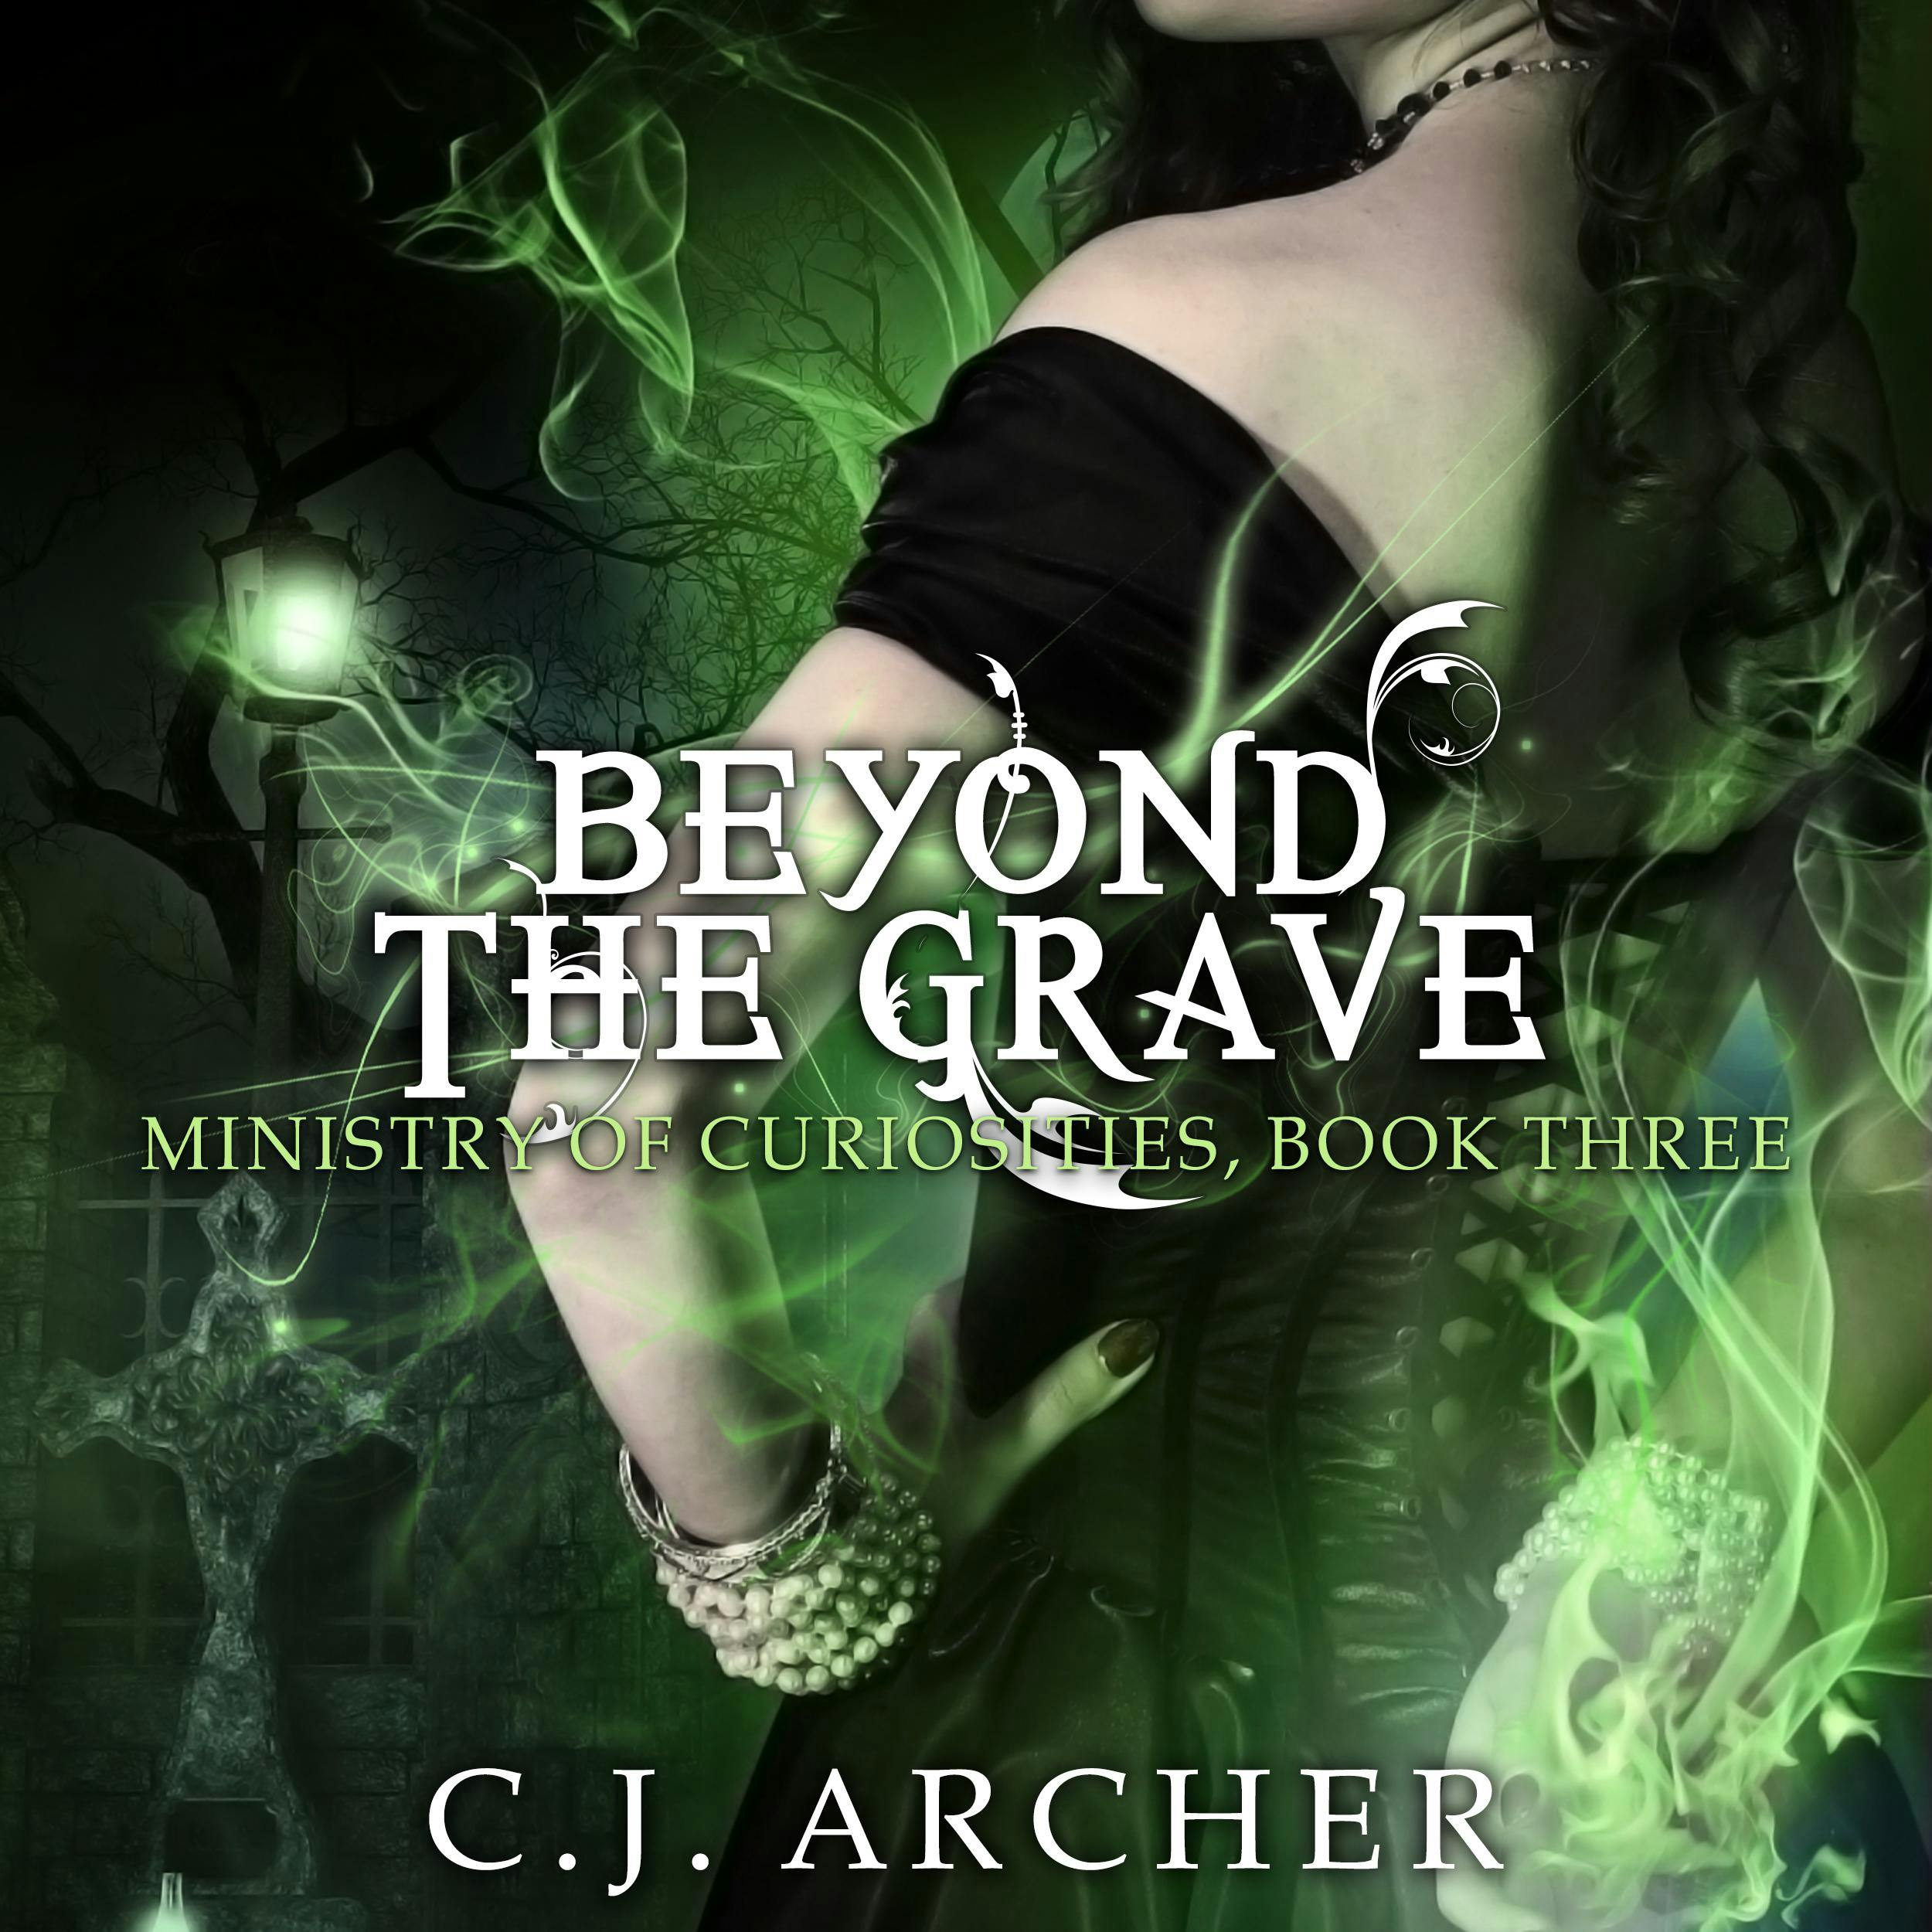 Beyond The Grave: The Ministry of Curiosities, book 3 - C.J. Archer